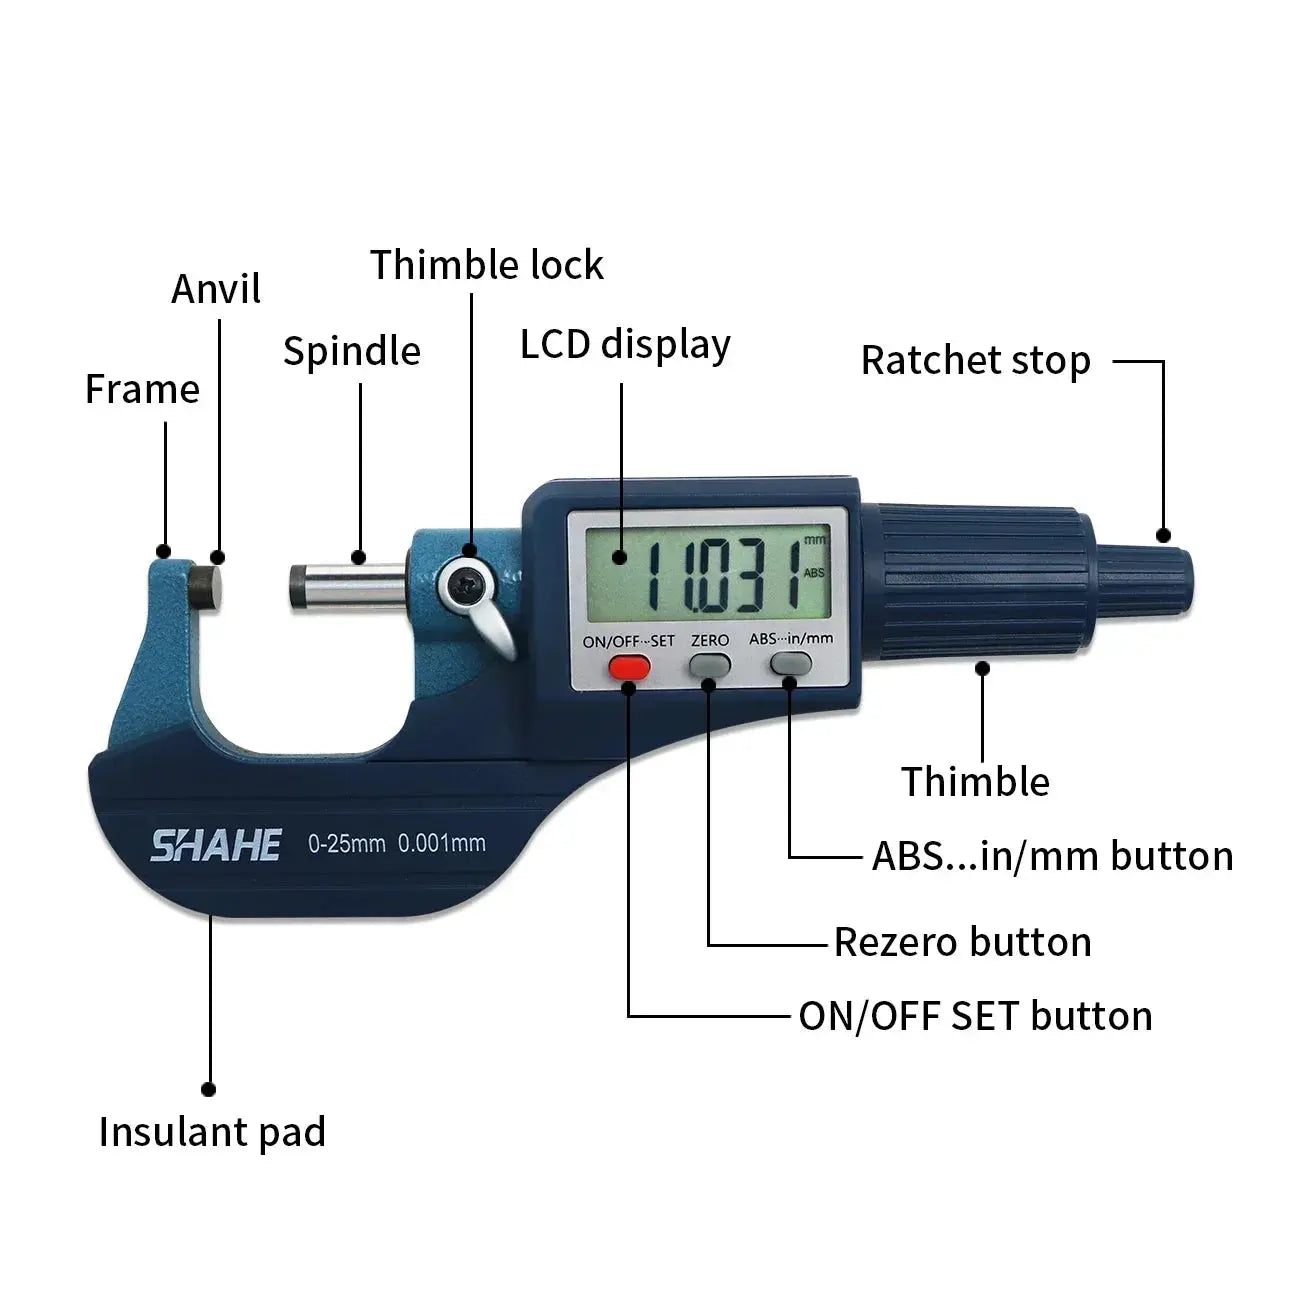 0.001 mm Electronic Outside Micrometer 0-25 mm With Extra Large LCD Screen Digital Micrometer Electronic Digital Caliper Gauge Shahe Official Store  EBOYGIFTS